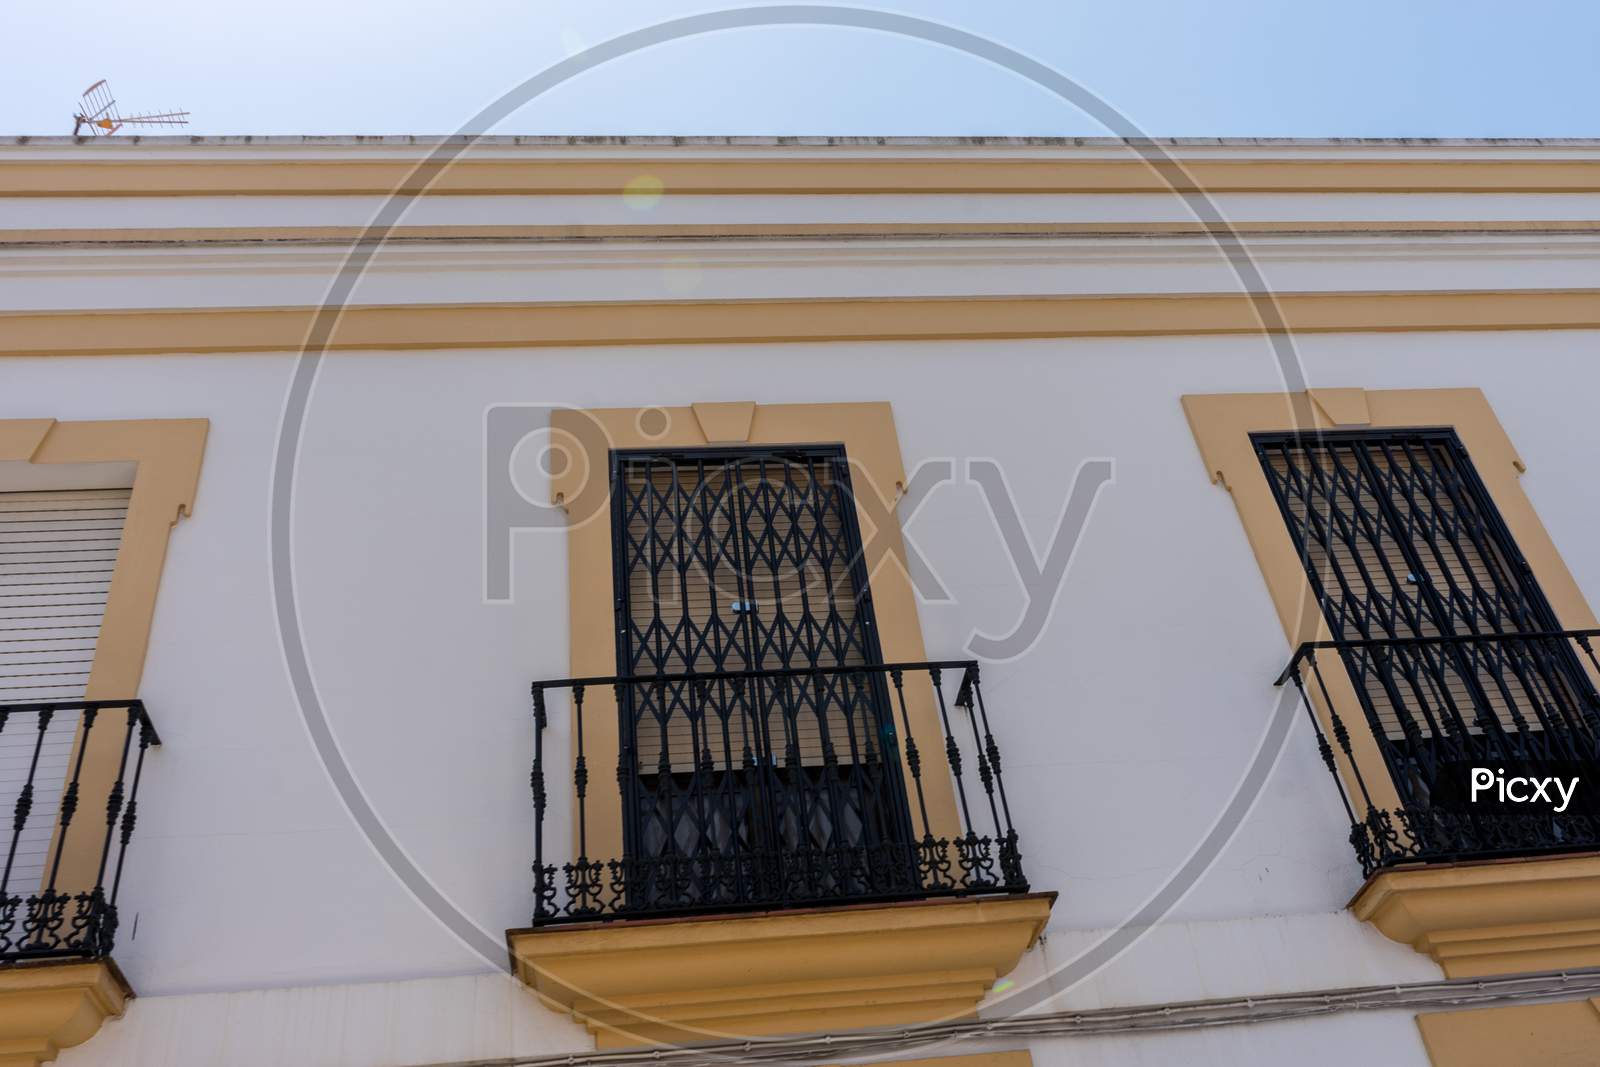 Spain, Cordoba, Low Angle View Of Building Against Sky